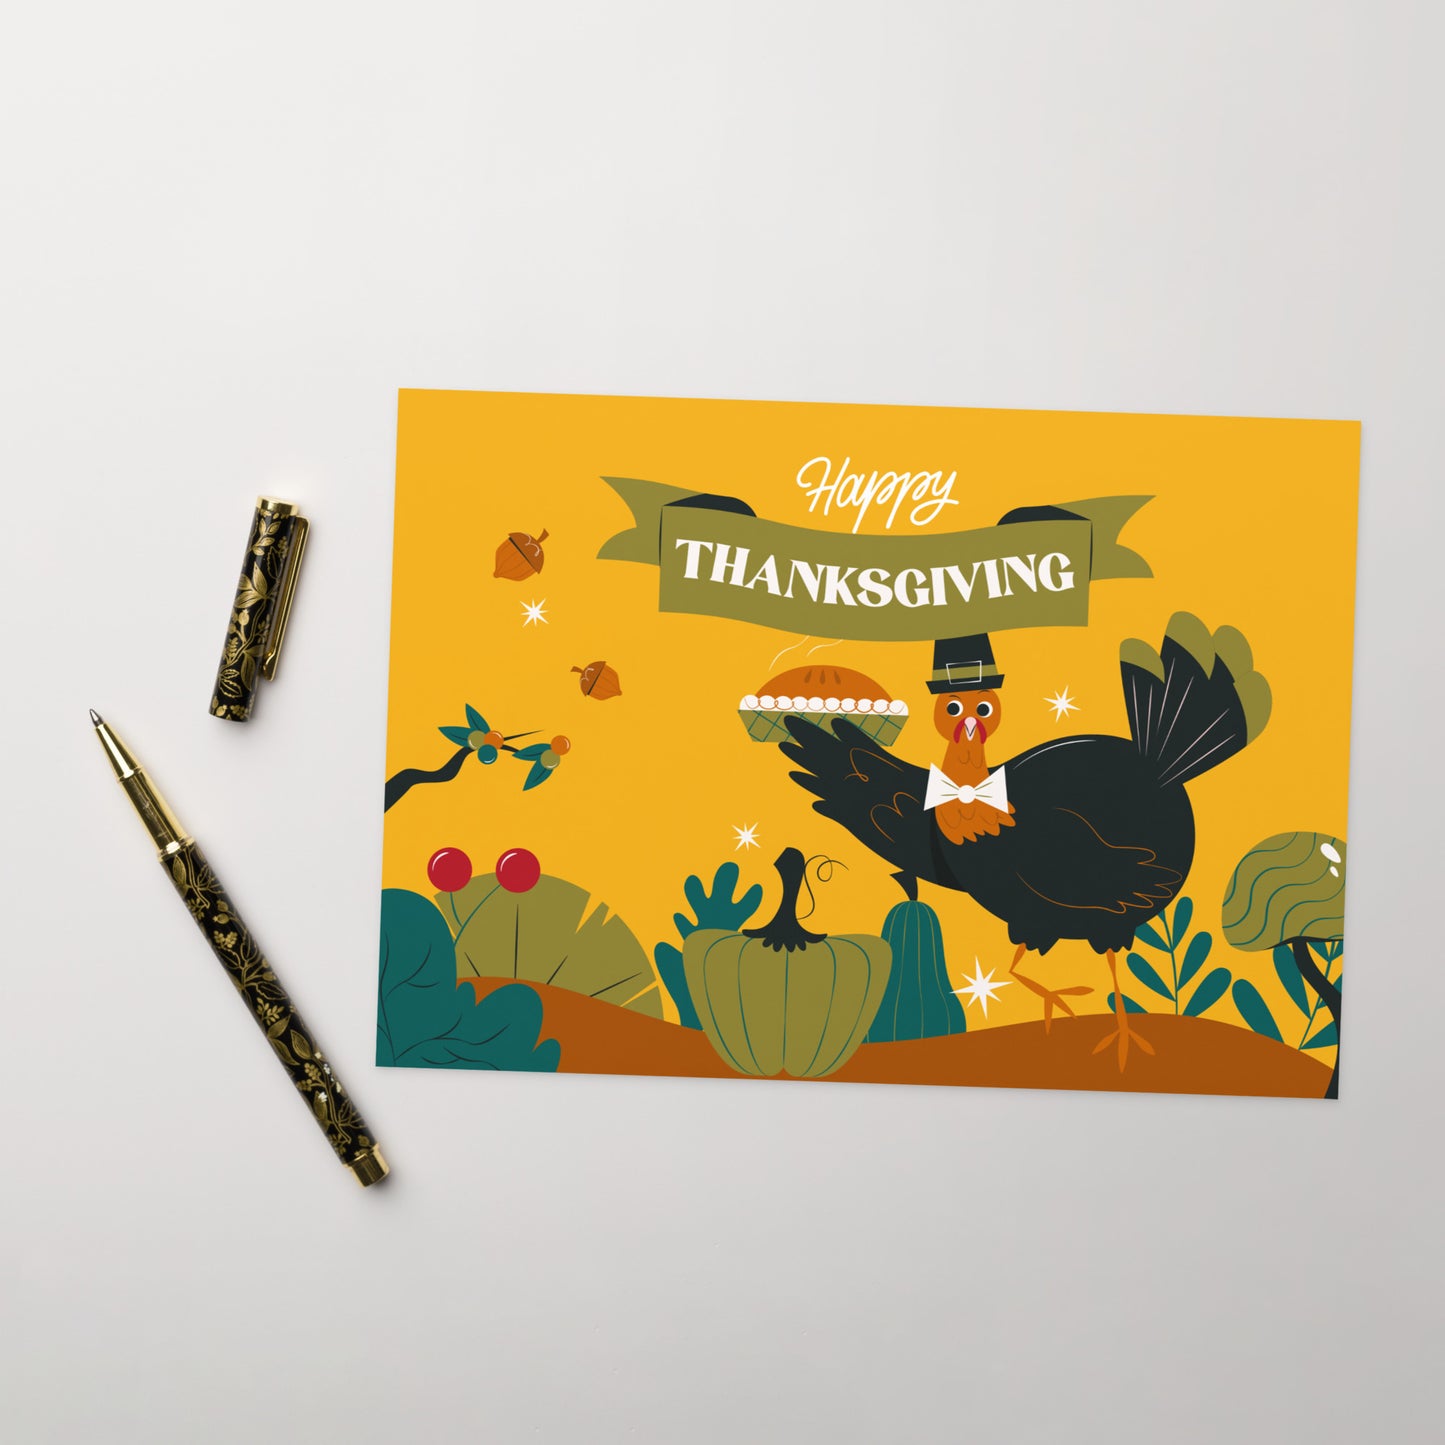 Feast Friends and Thankful Hearts - Happy Thanksgiving Greeting Card